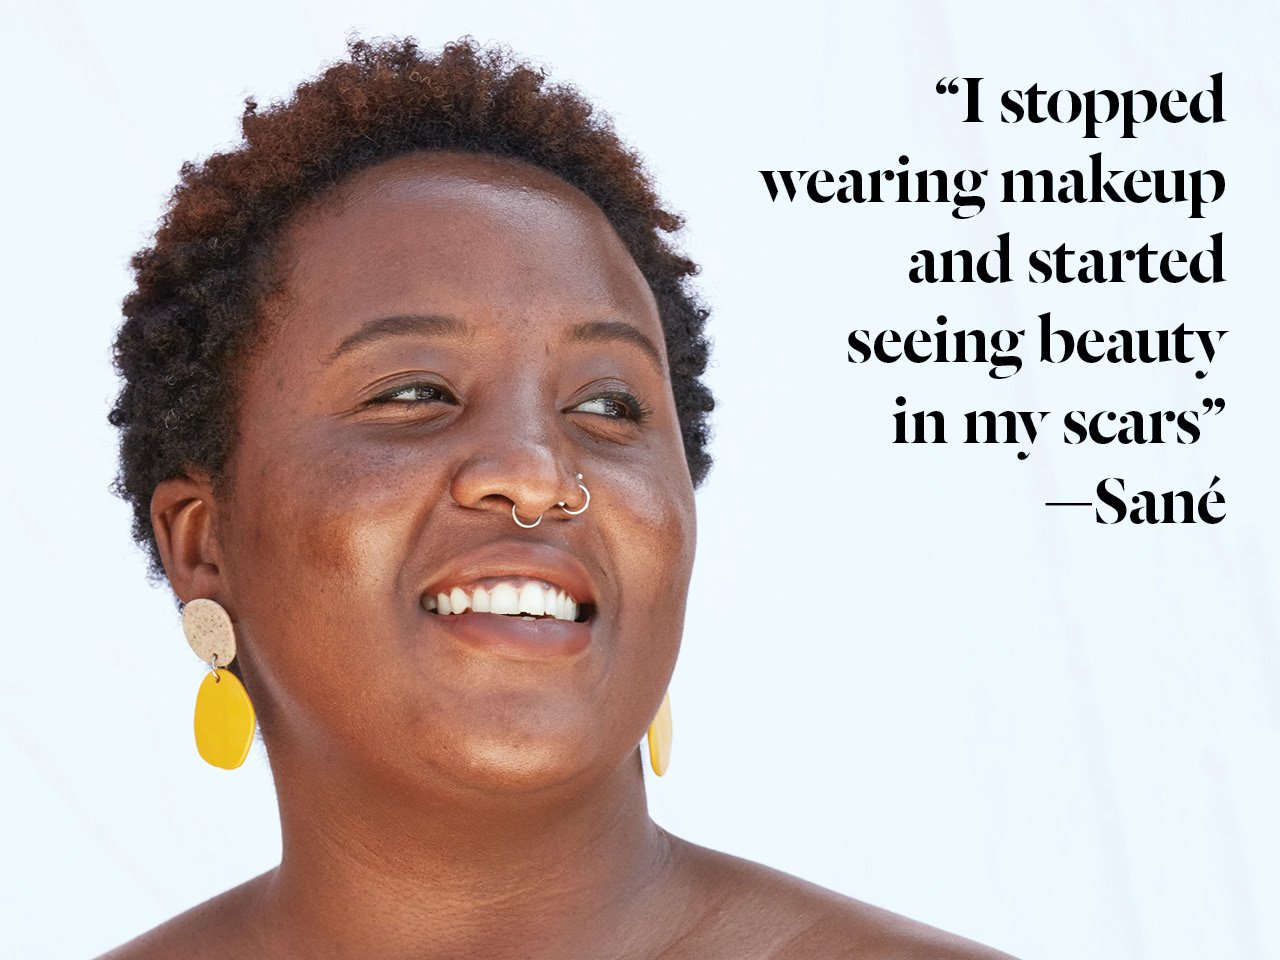 A photo of a Black woman with short hard and glowing skin, wearing yellow circular earrings